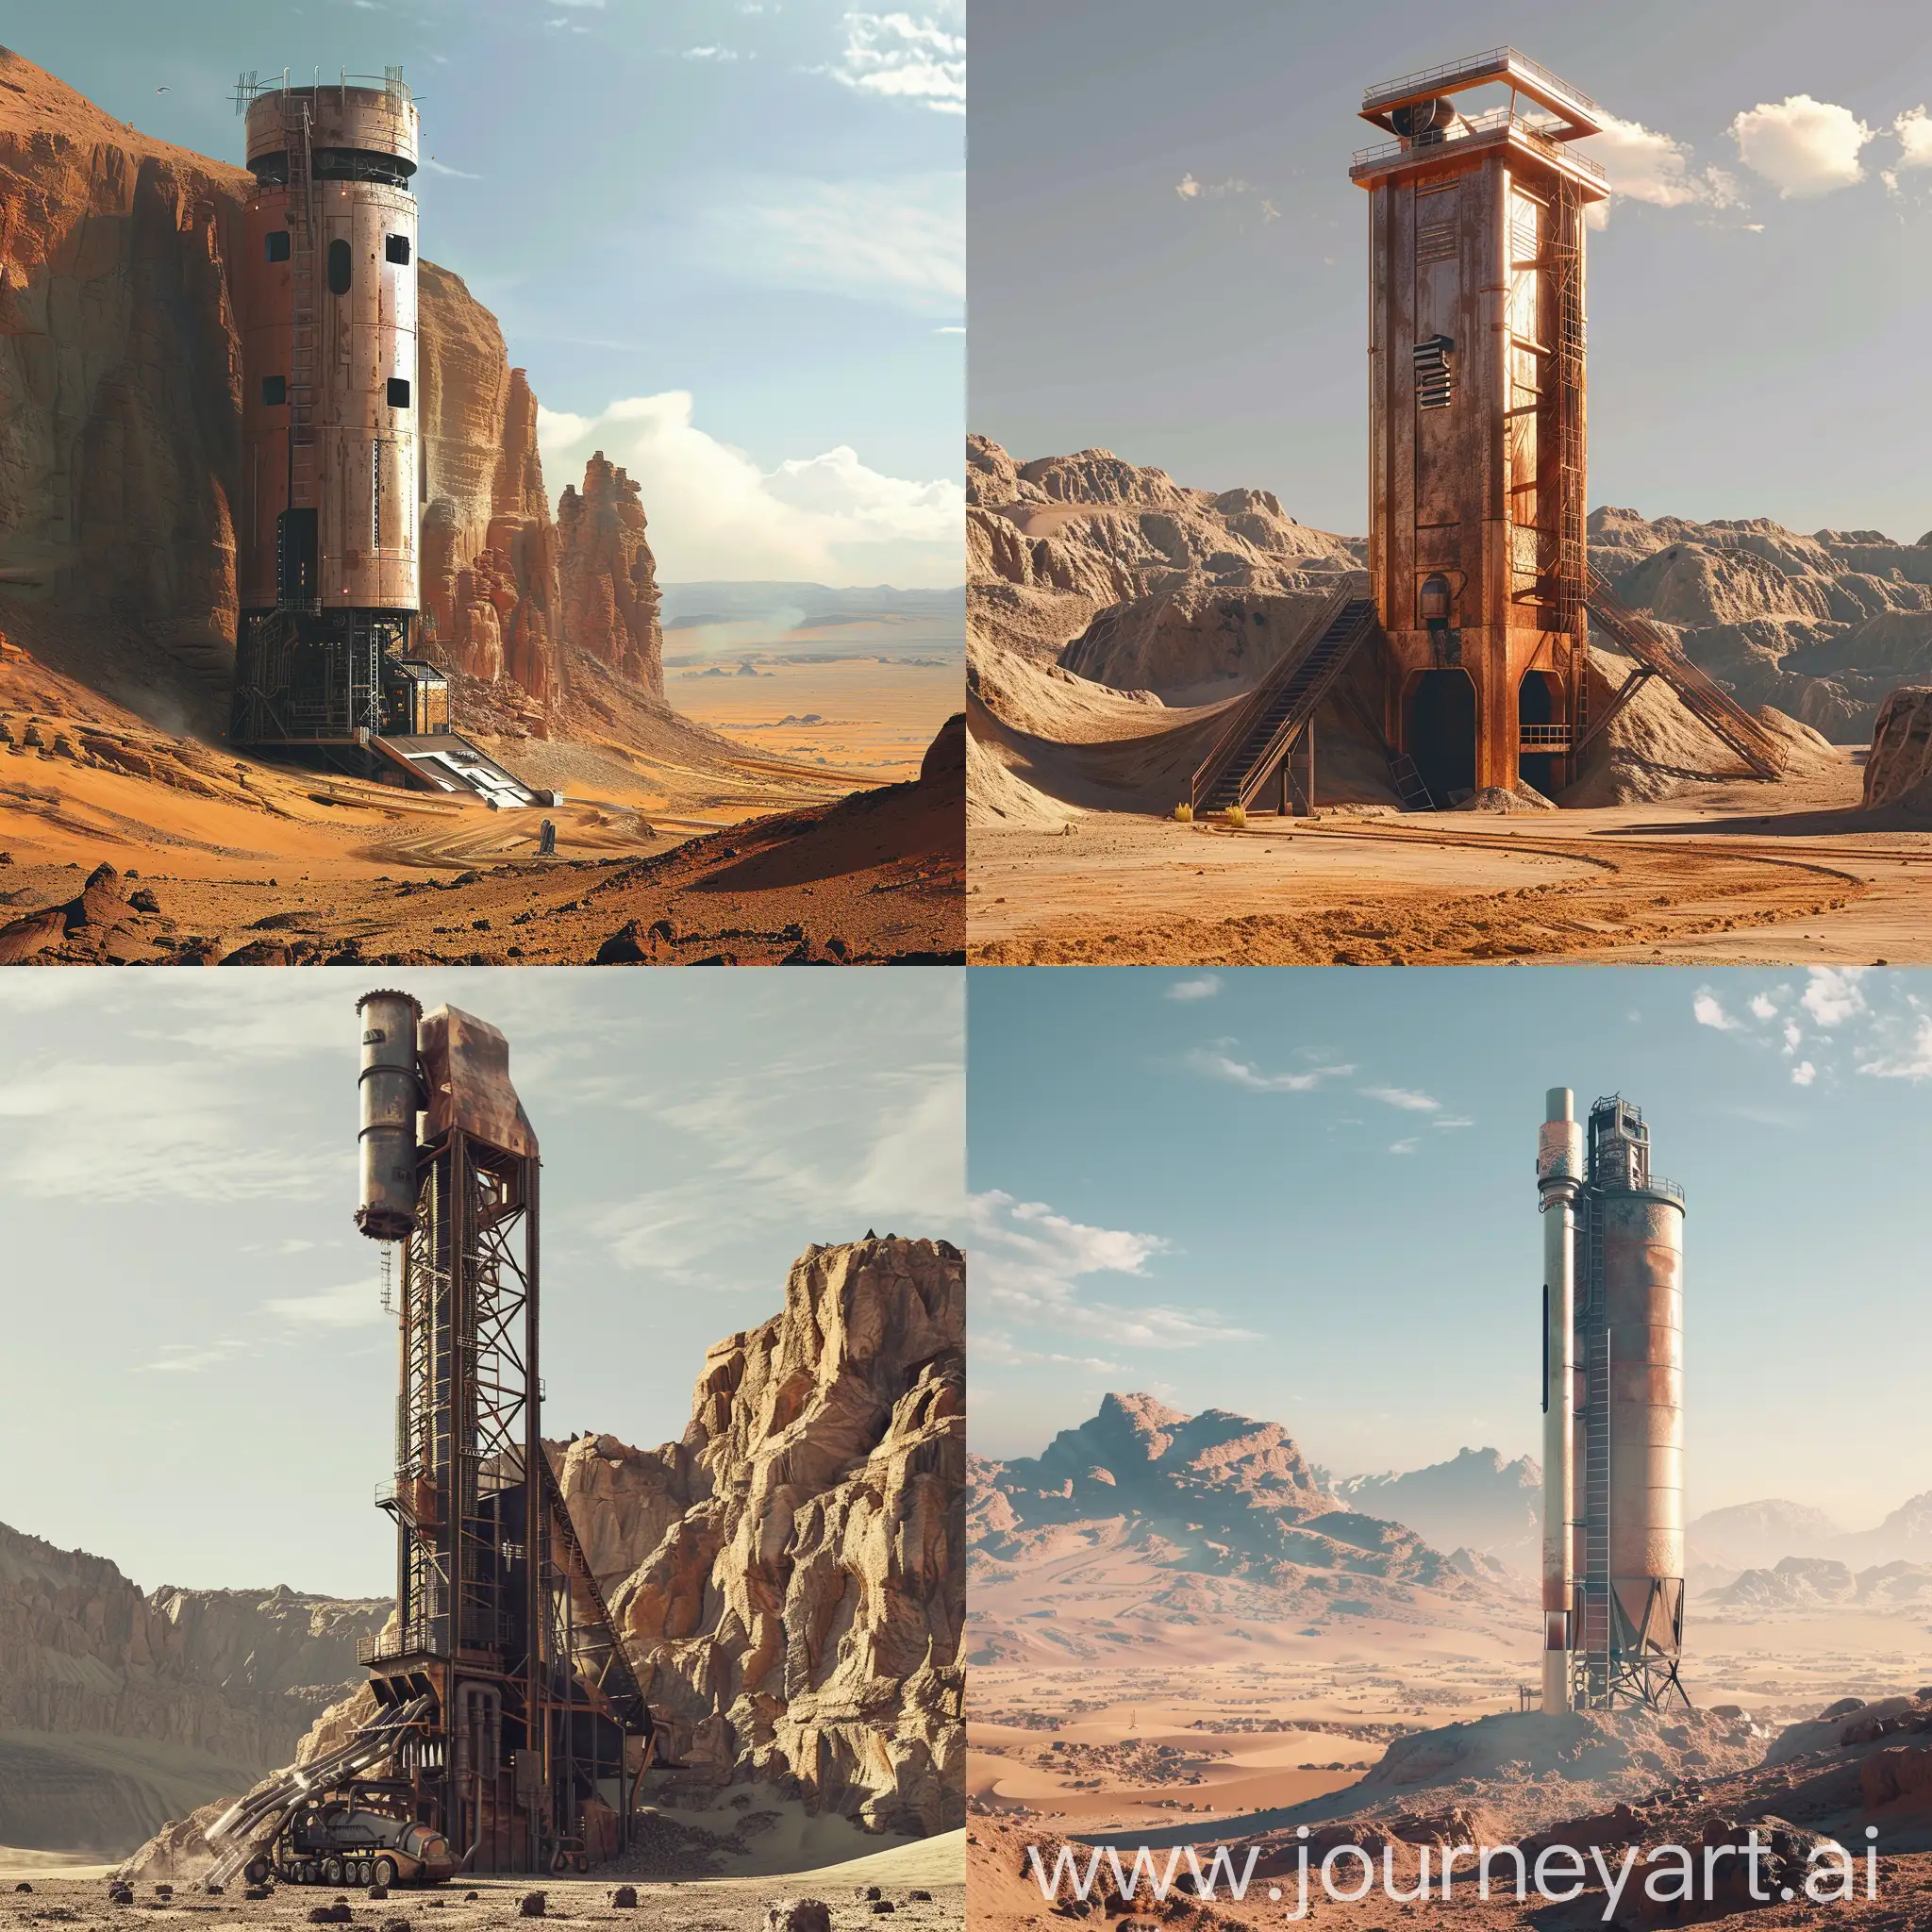 Desert-SciFi-Mining-Tower-with-Advanced-Technology